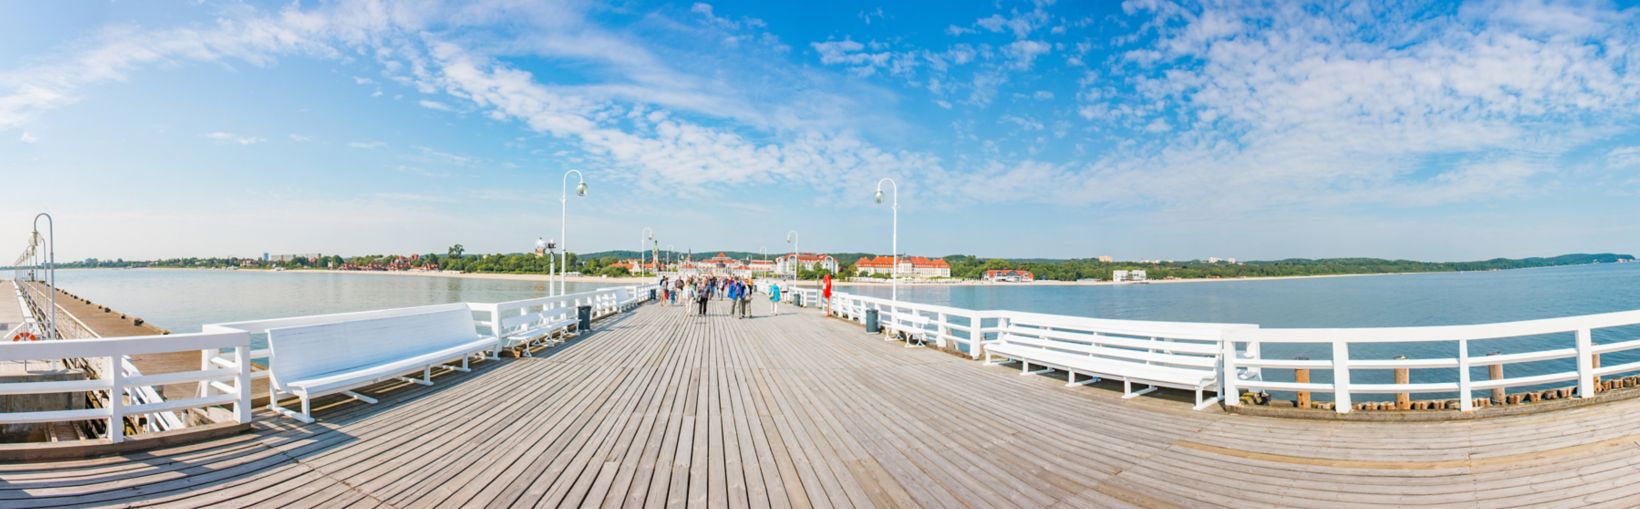 View of people walking on Sopot Pier in Gdynia, Poland on a sunny day